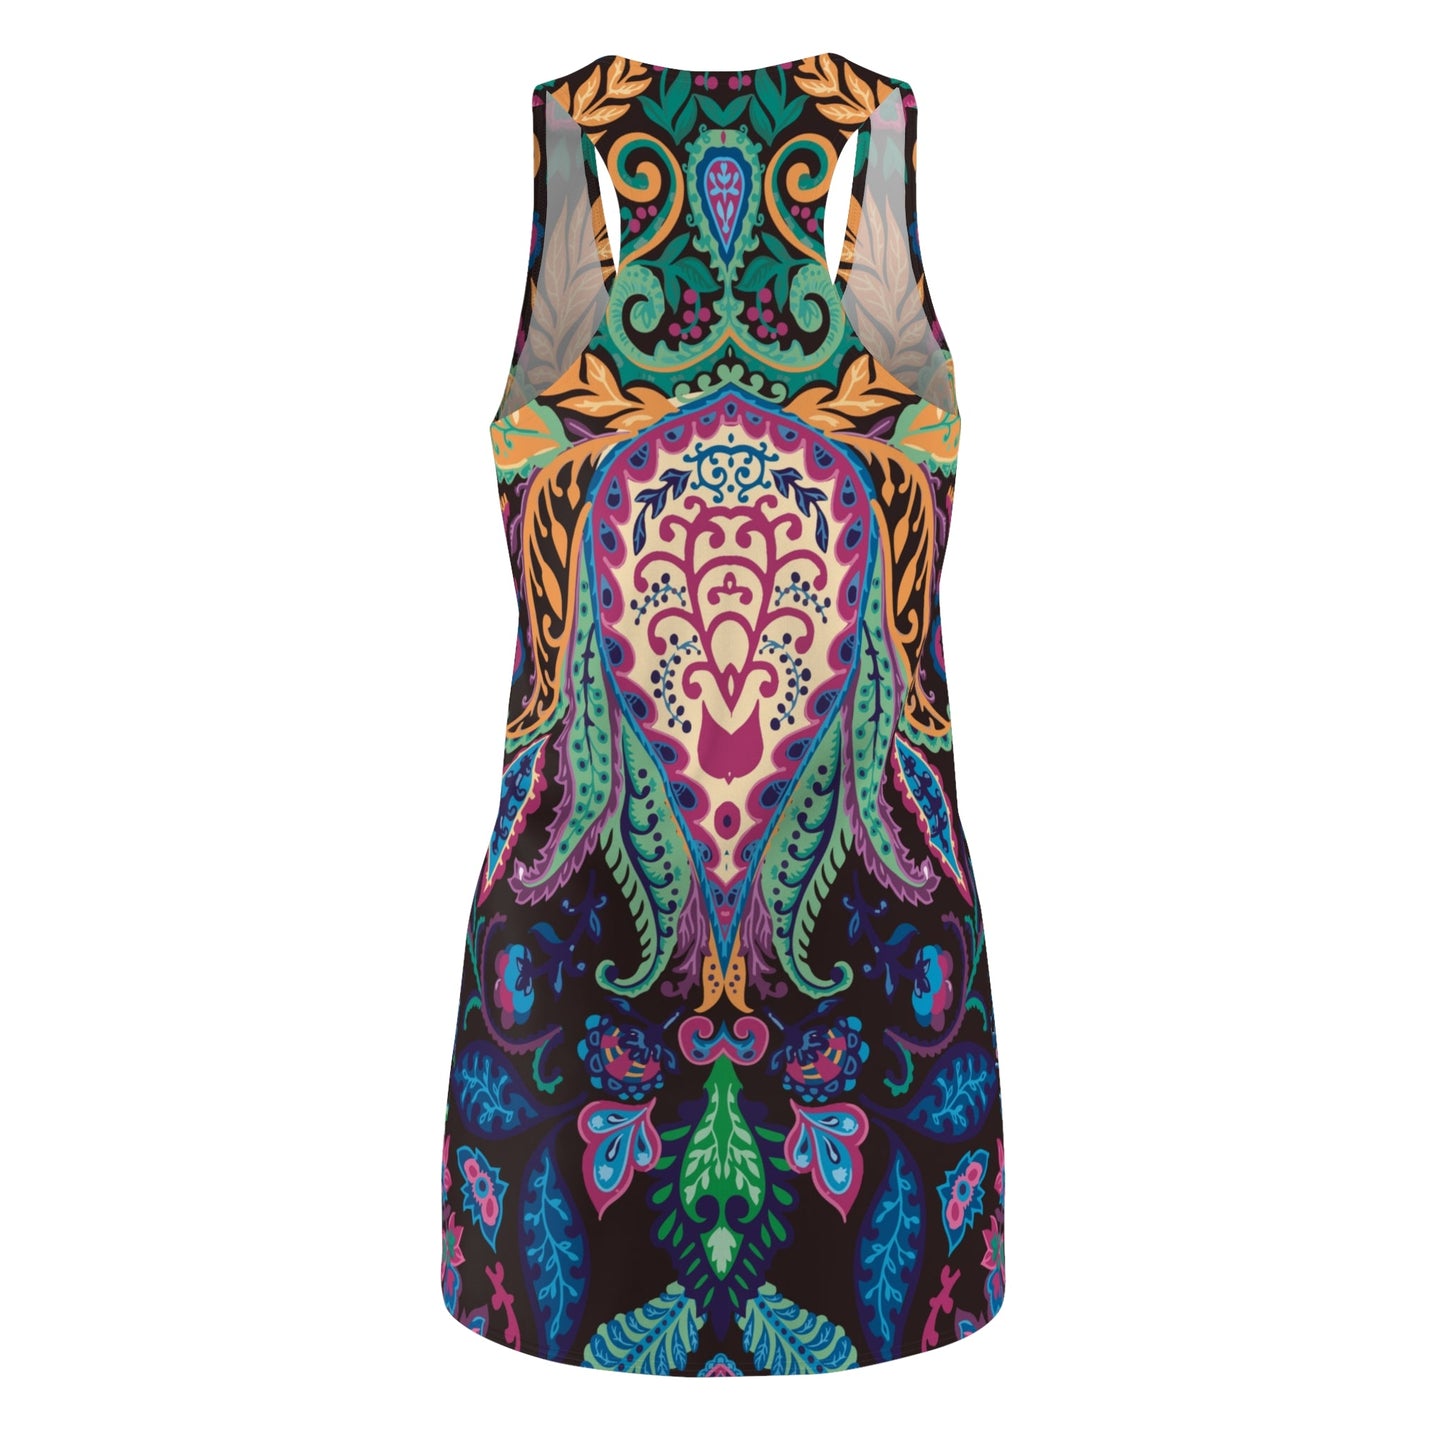 All Over Prints - Women's Psychedelic Cut & Sew Racerback Dress